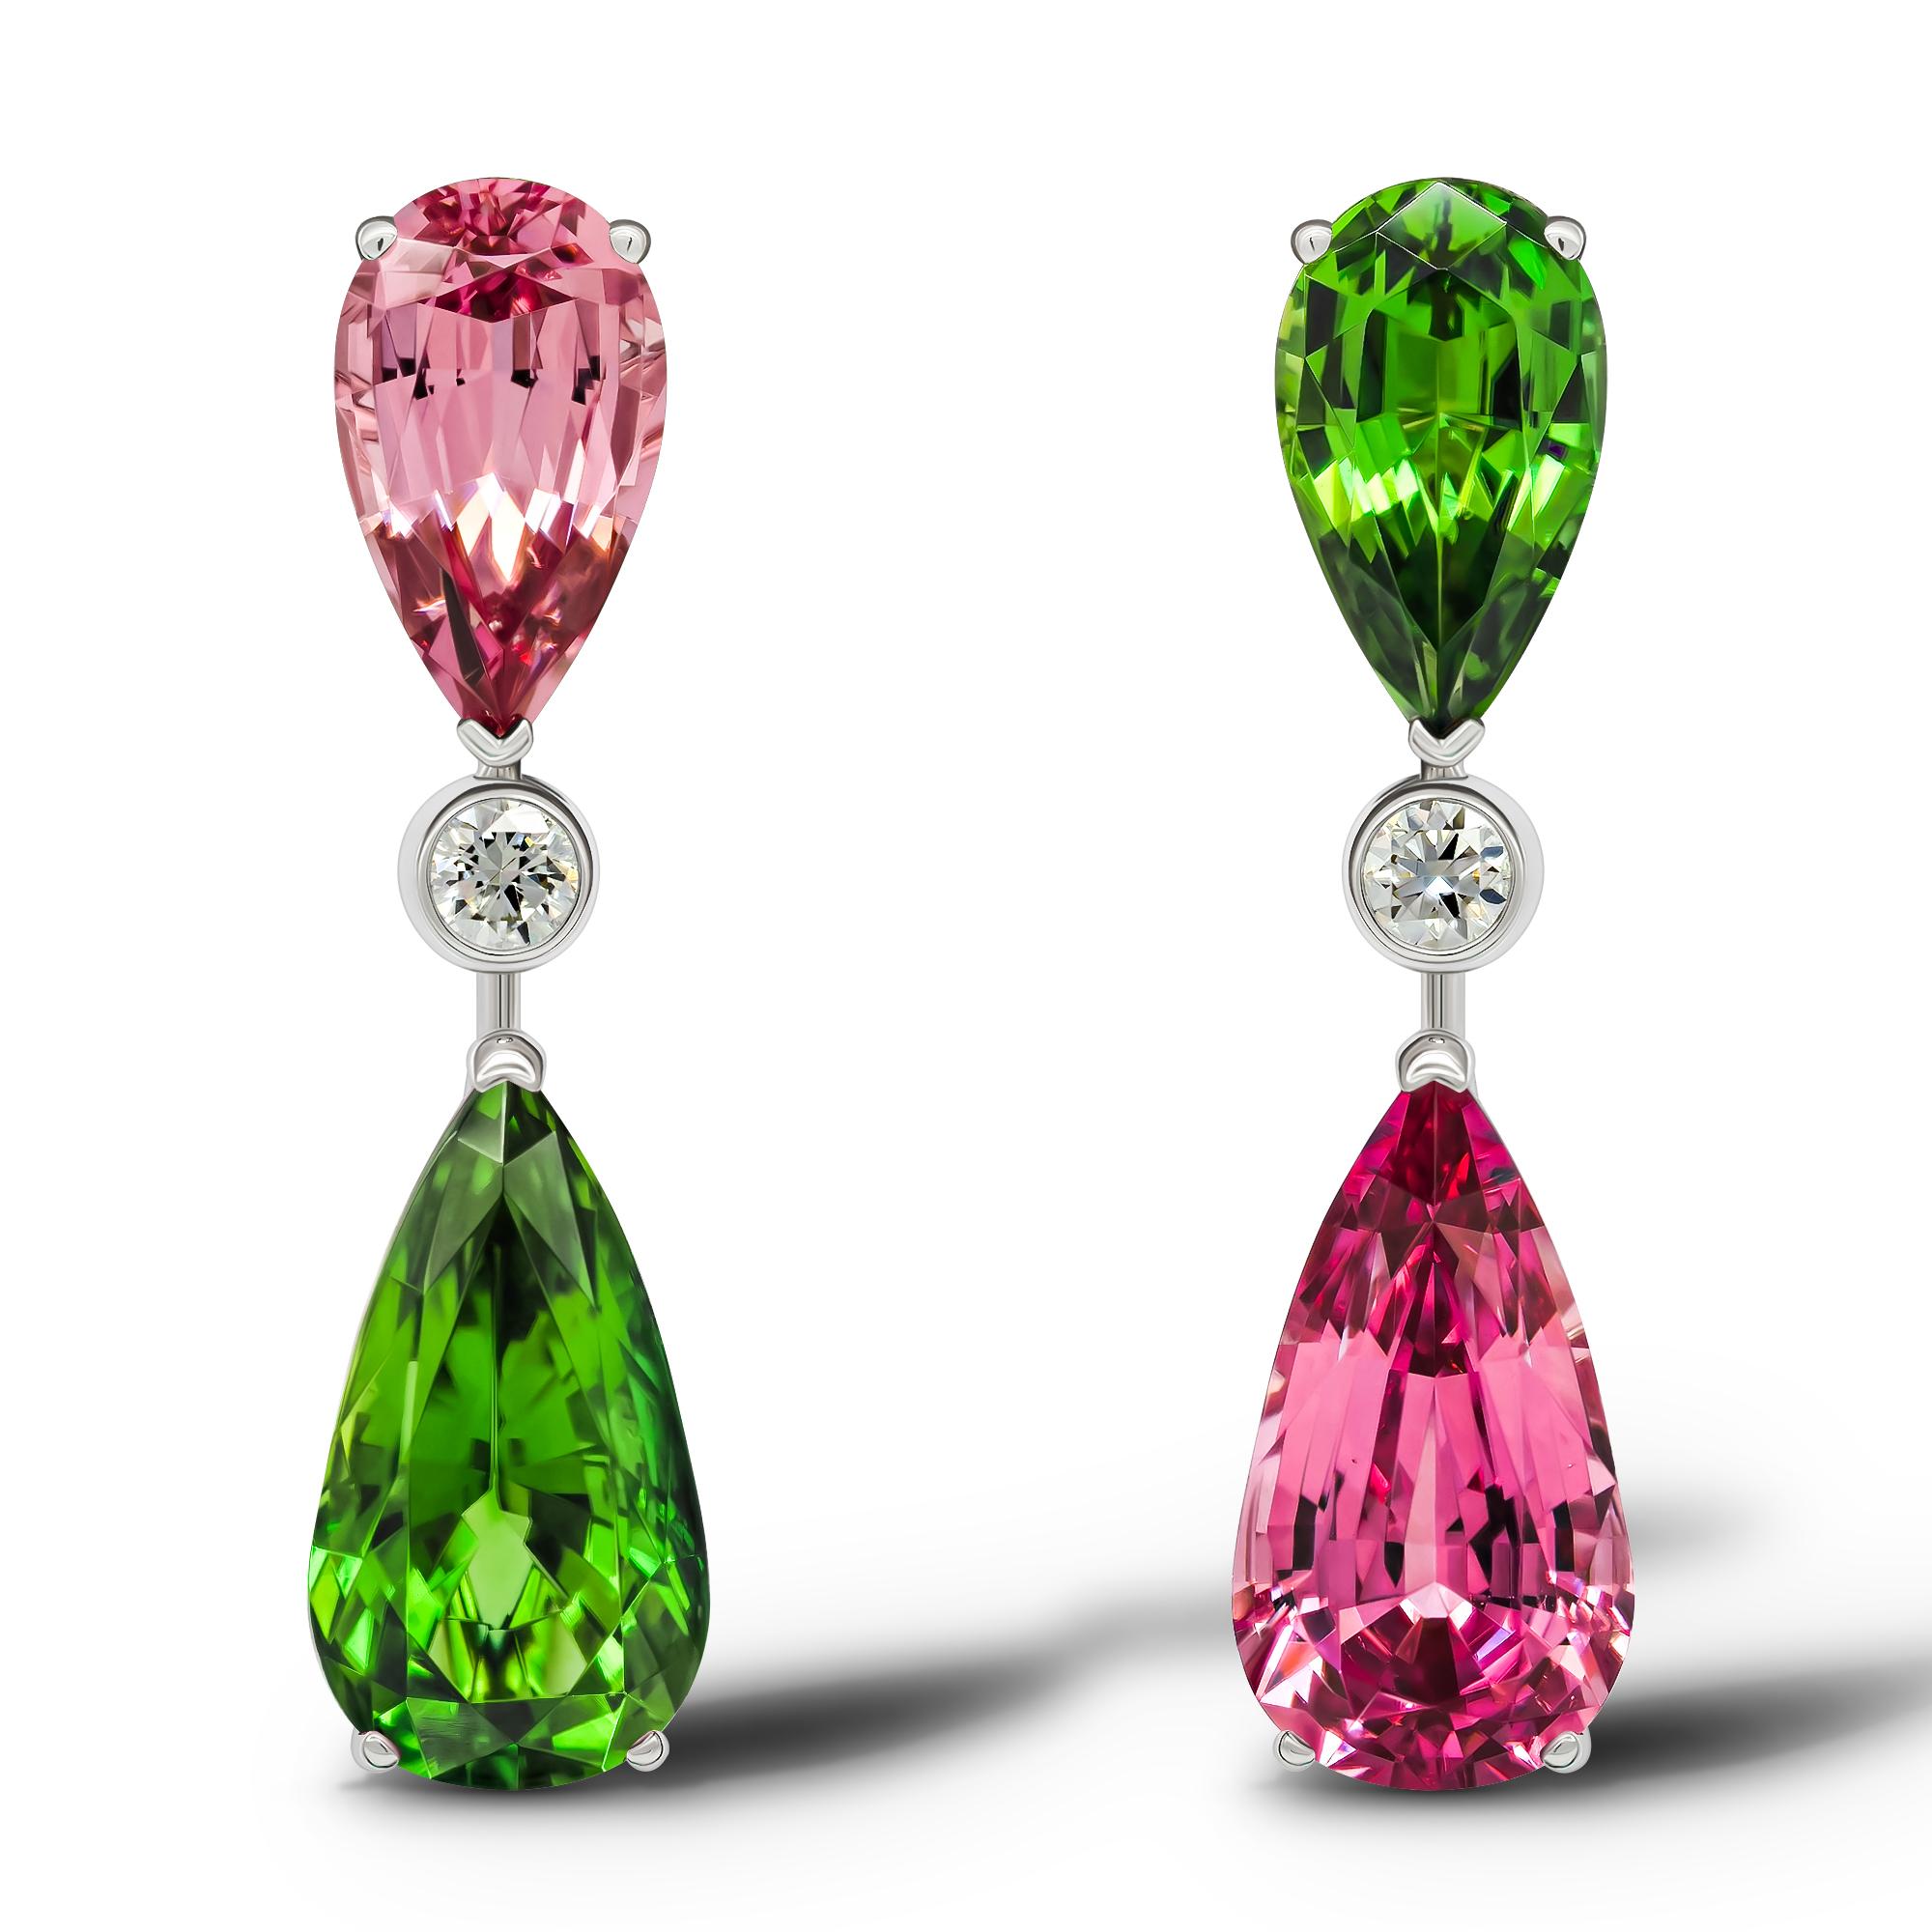 • 18k White Gold.
• Pink Spinels in pear cut – 2 pc, total carat weight 4.56.
• Chrome Tourmalines in pear cut – 2 pc, total carat weight 4.81.
• Diamonds in round cut – 2 pc, total carat weight 0.16.
• Product weight – 5.85 grams.
